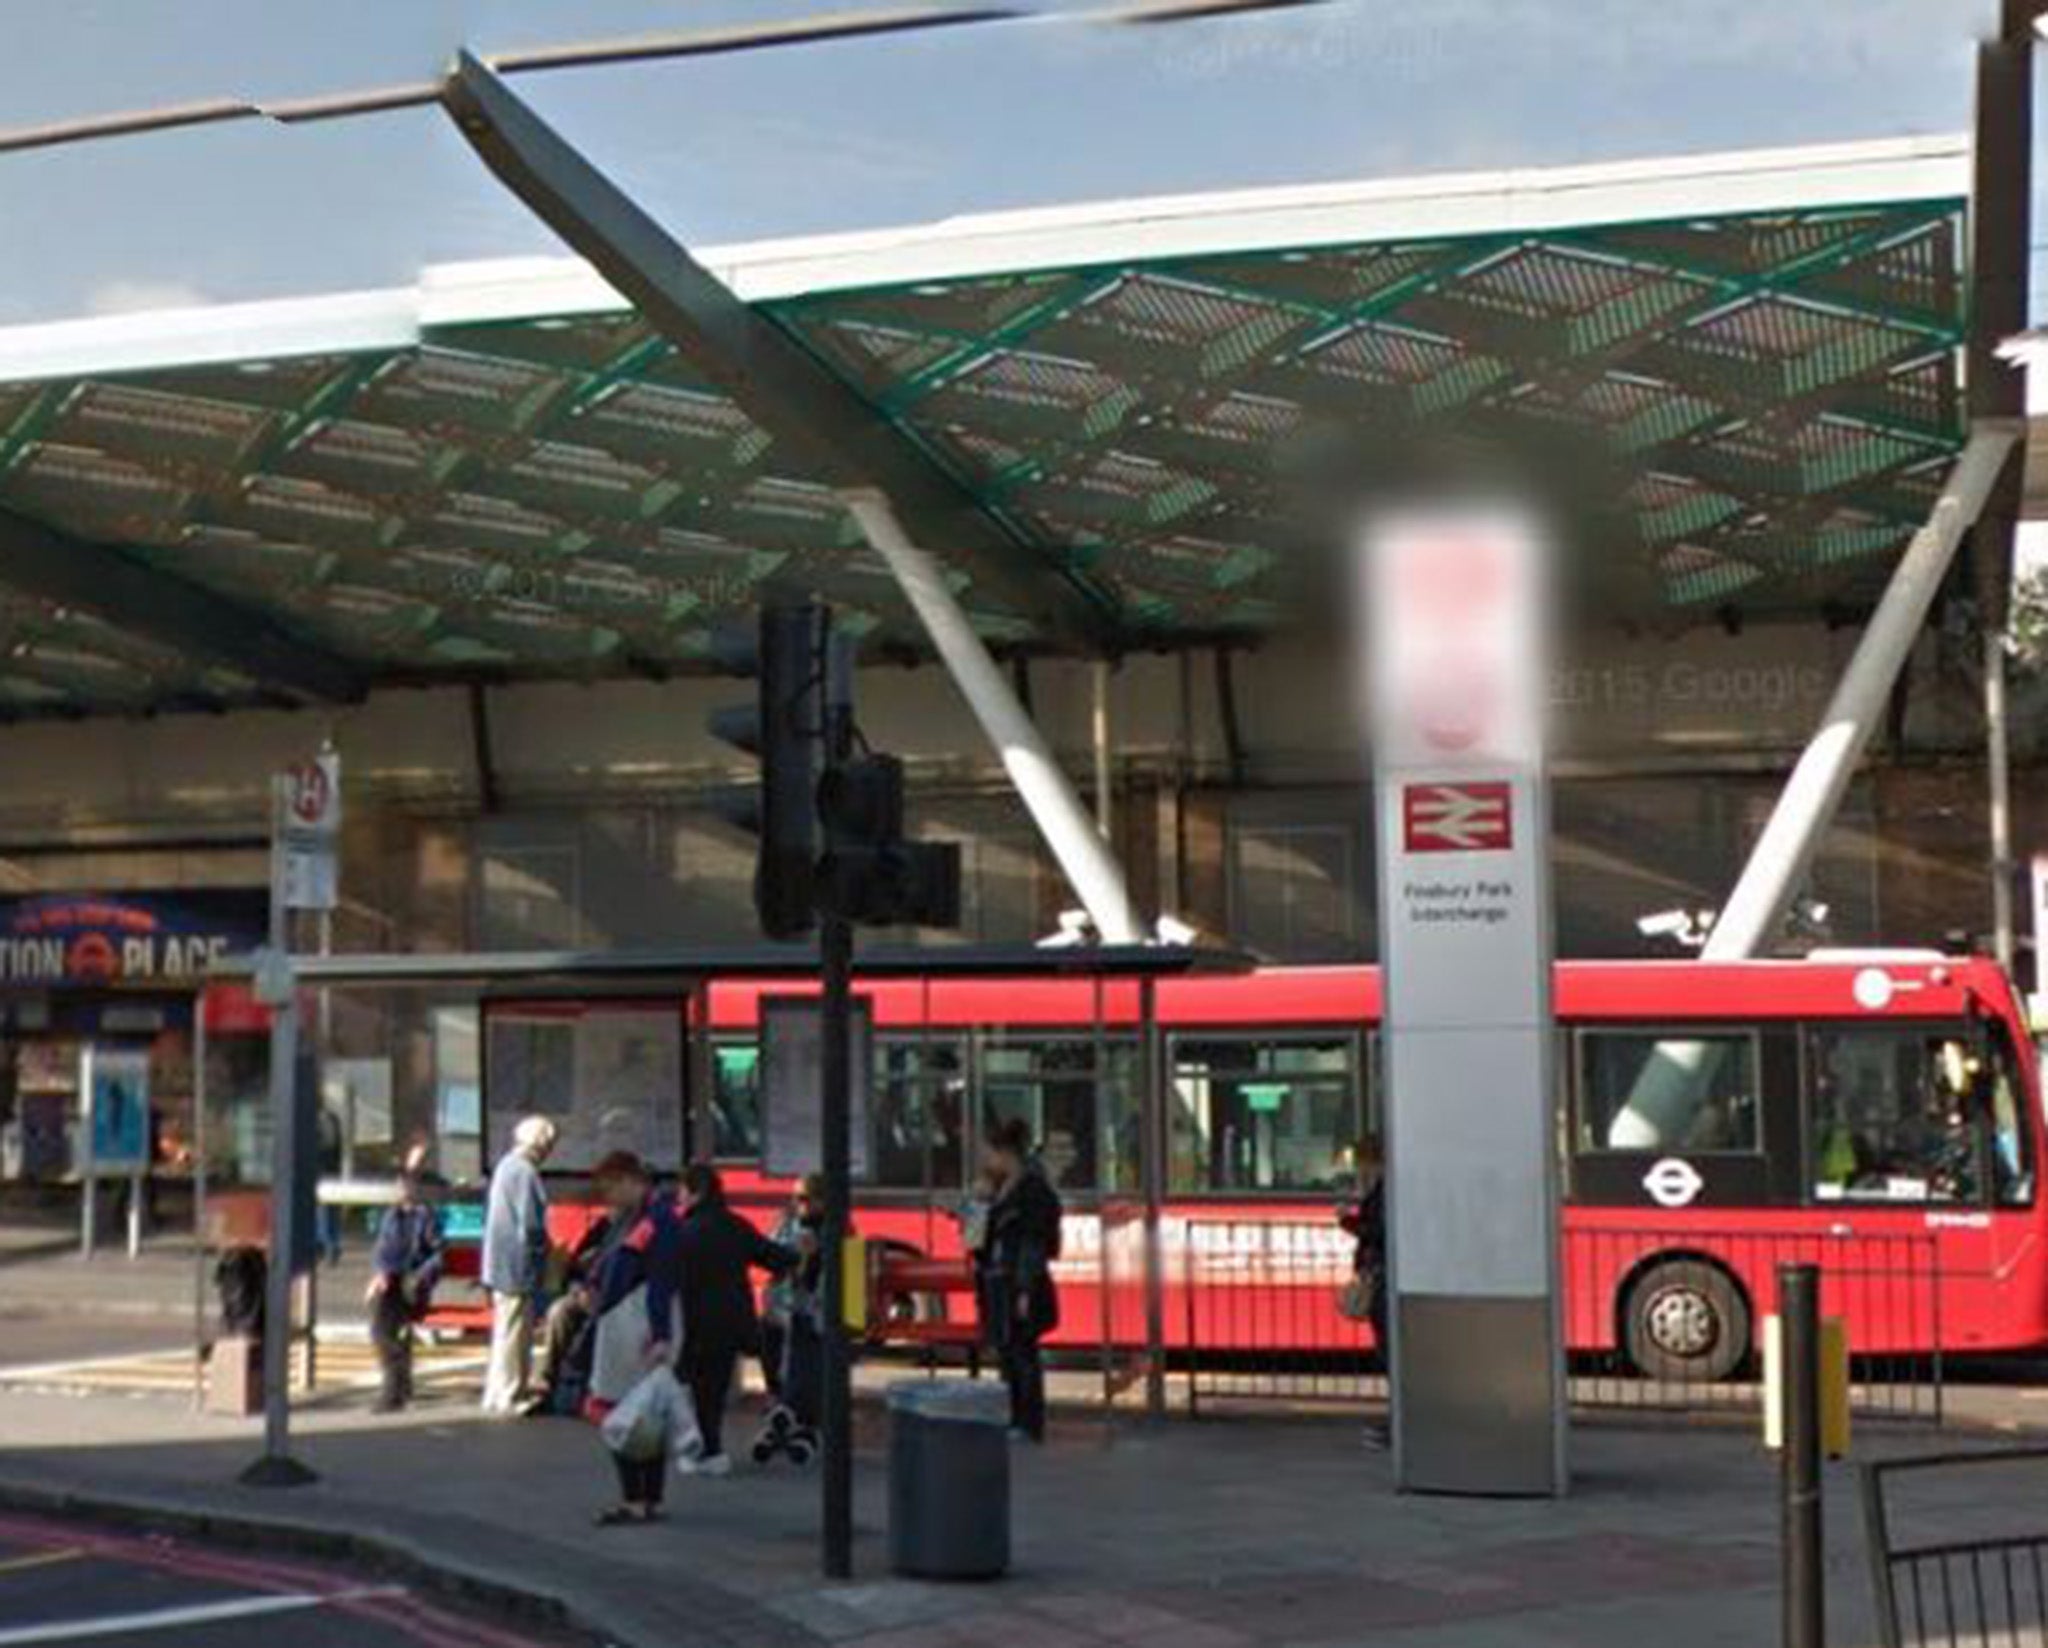 British Transport Police were called to the incident at Finsbury Park station on Sunday